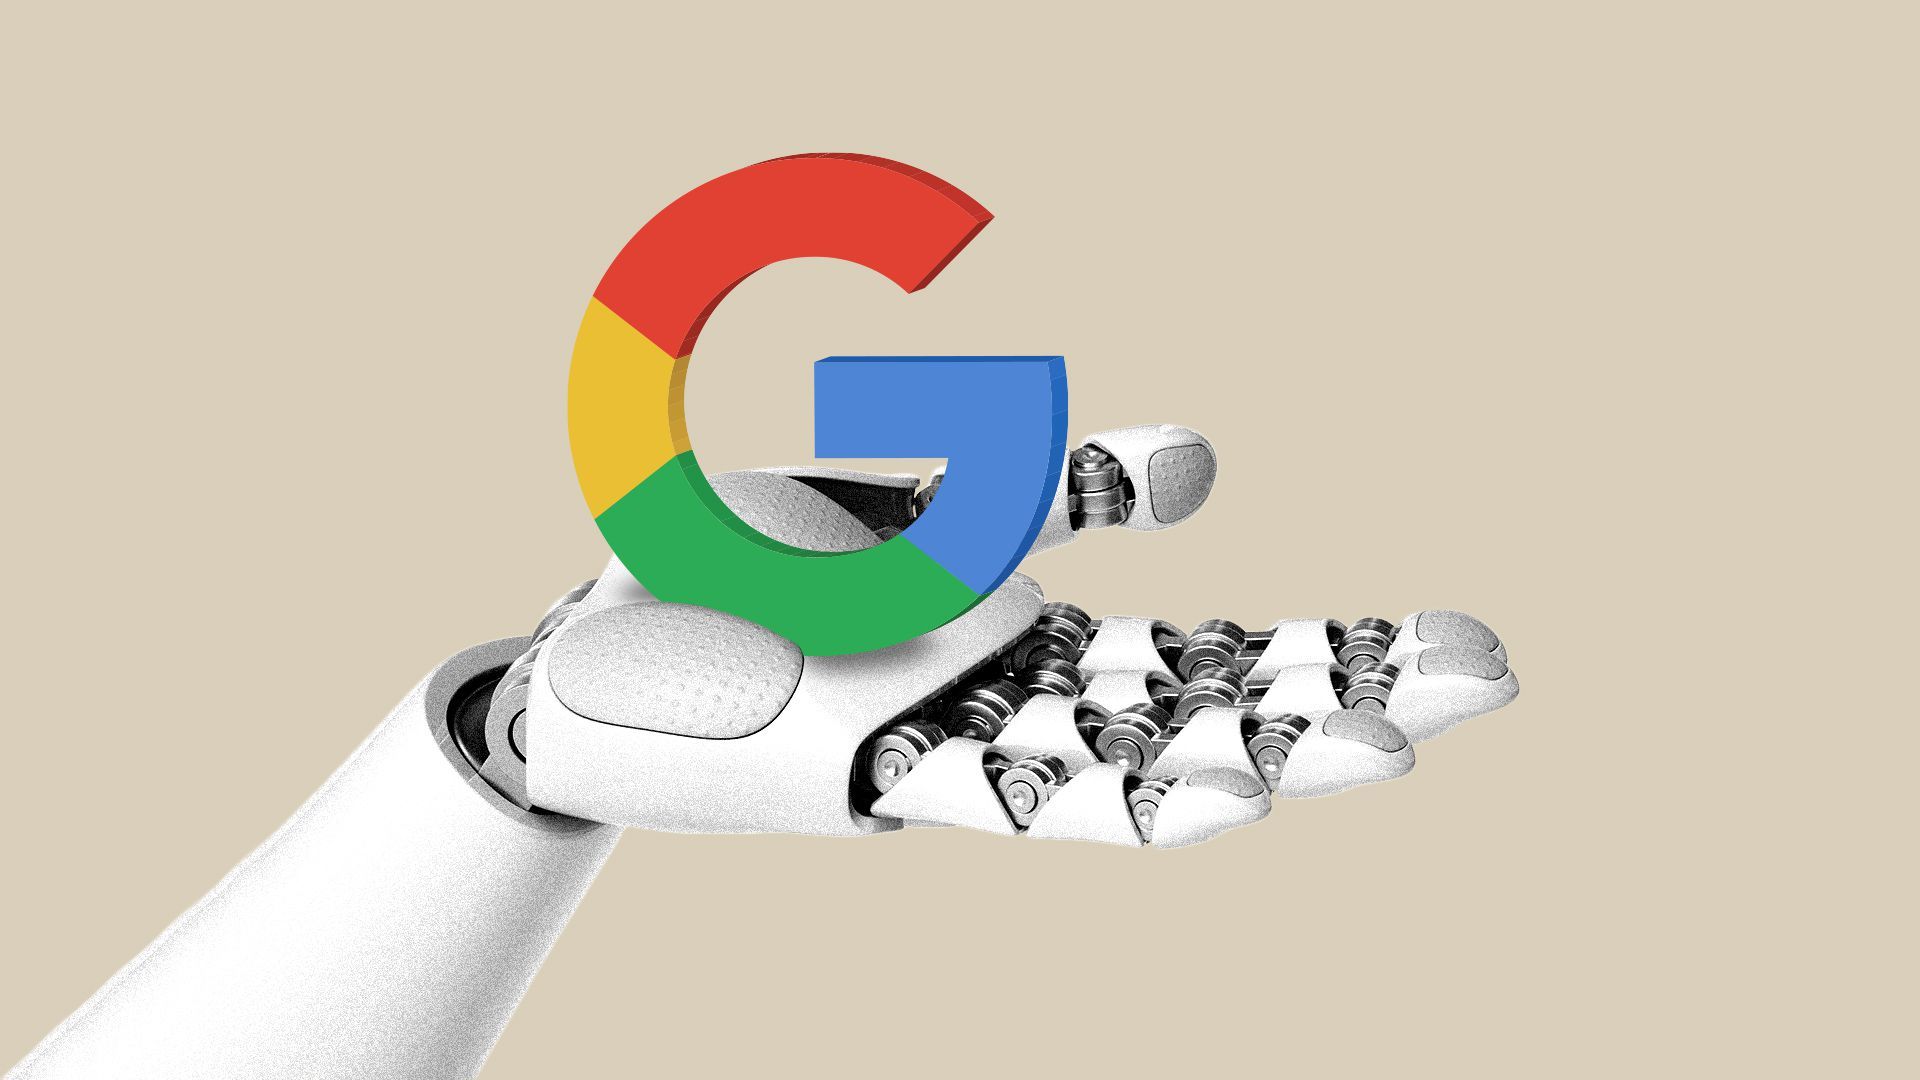 Illustration of a robot hand holding up the Google "G"